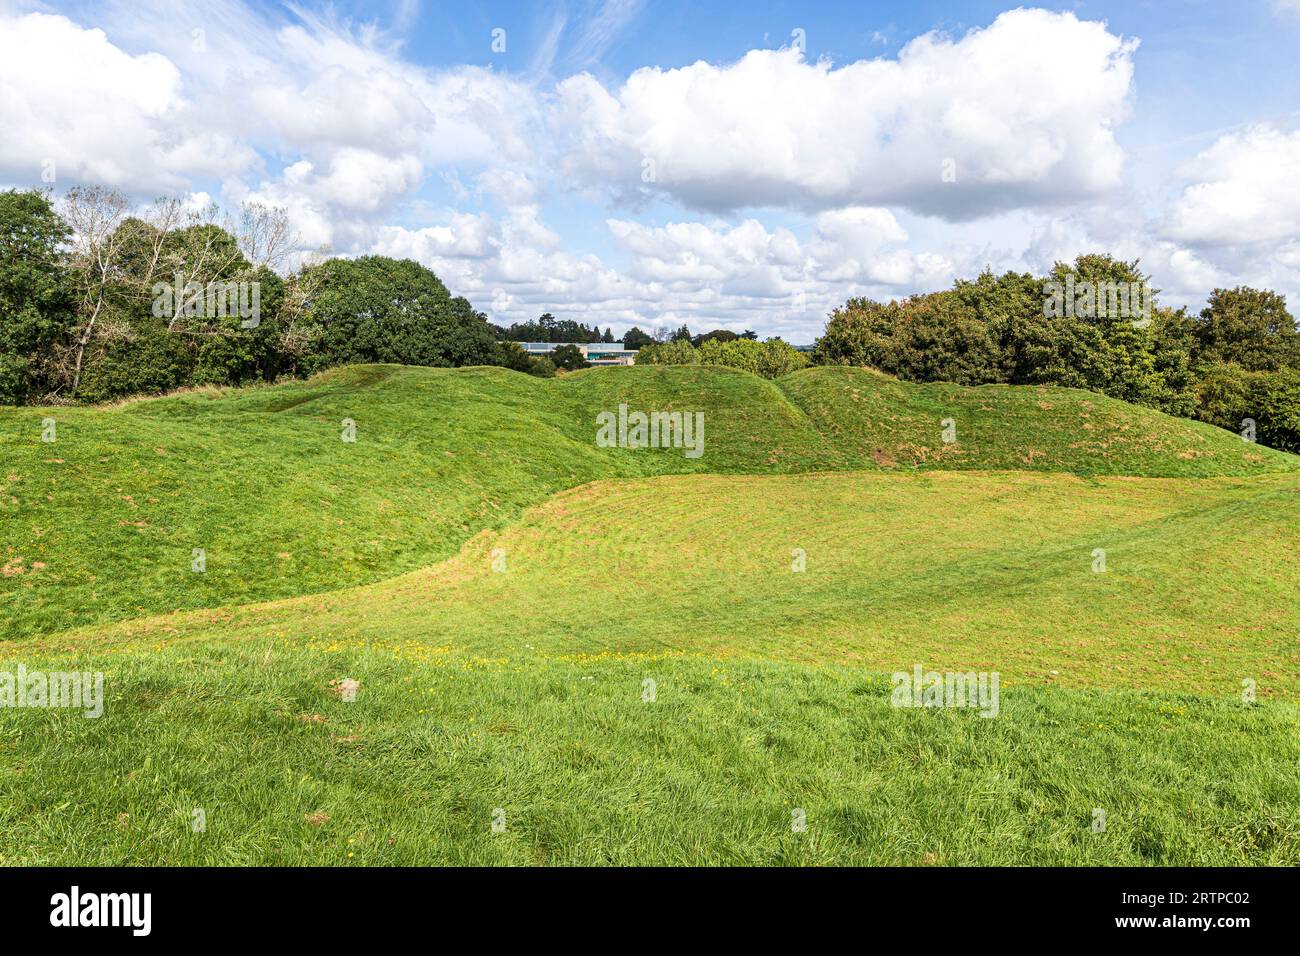 The early 2nd century AD Roman amphitheatre on the outskirts of Corinium, now the Cotswold town of Cirencester, Gloucestershire, England UK Stock Photo